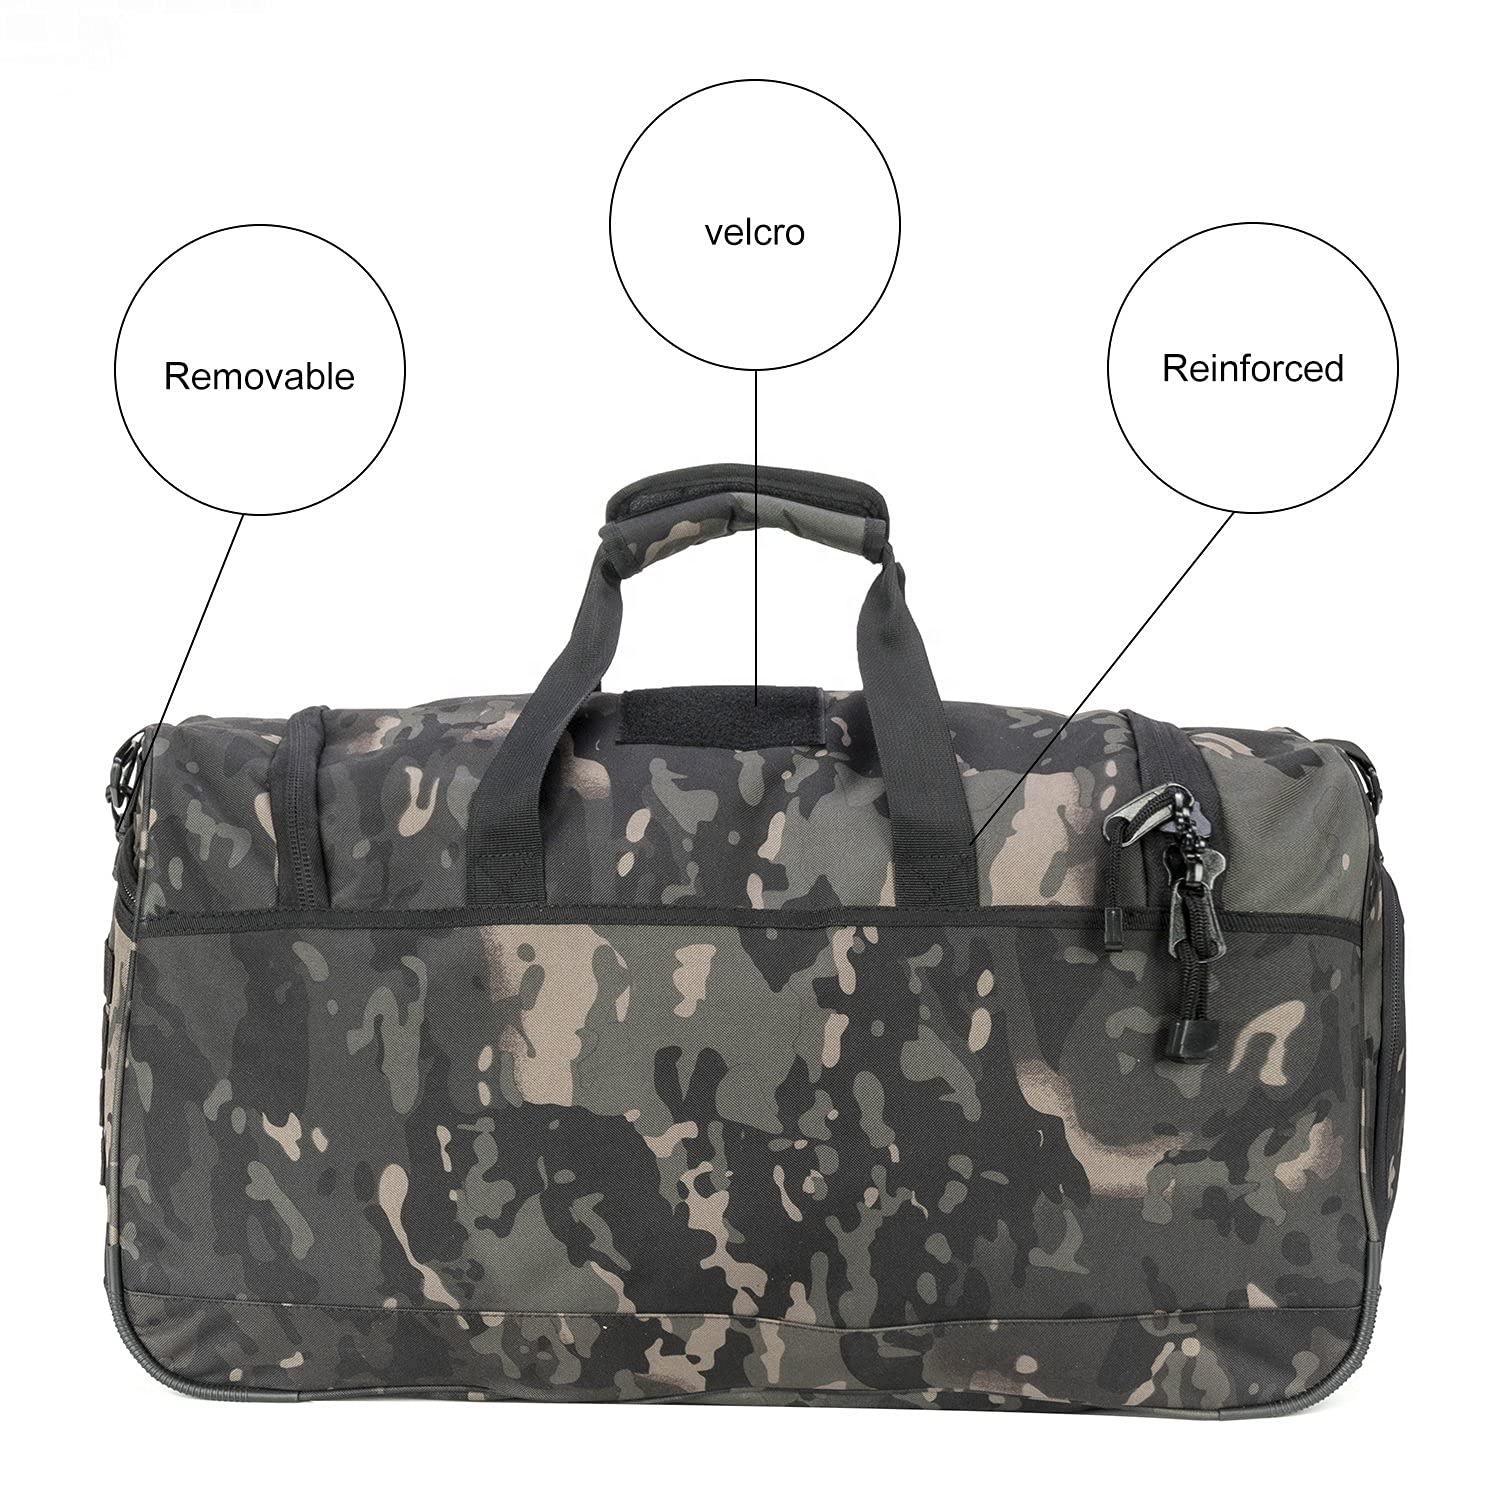 Extra Large Adjustable Strap Retro Man Sports Duffle Bag with Shoes Compartment Travel Yoga Outdoor Sports Bag